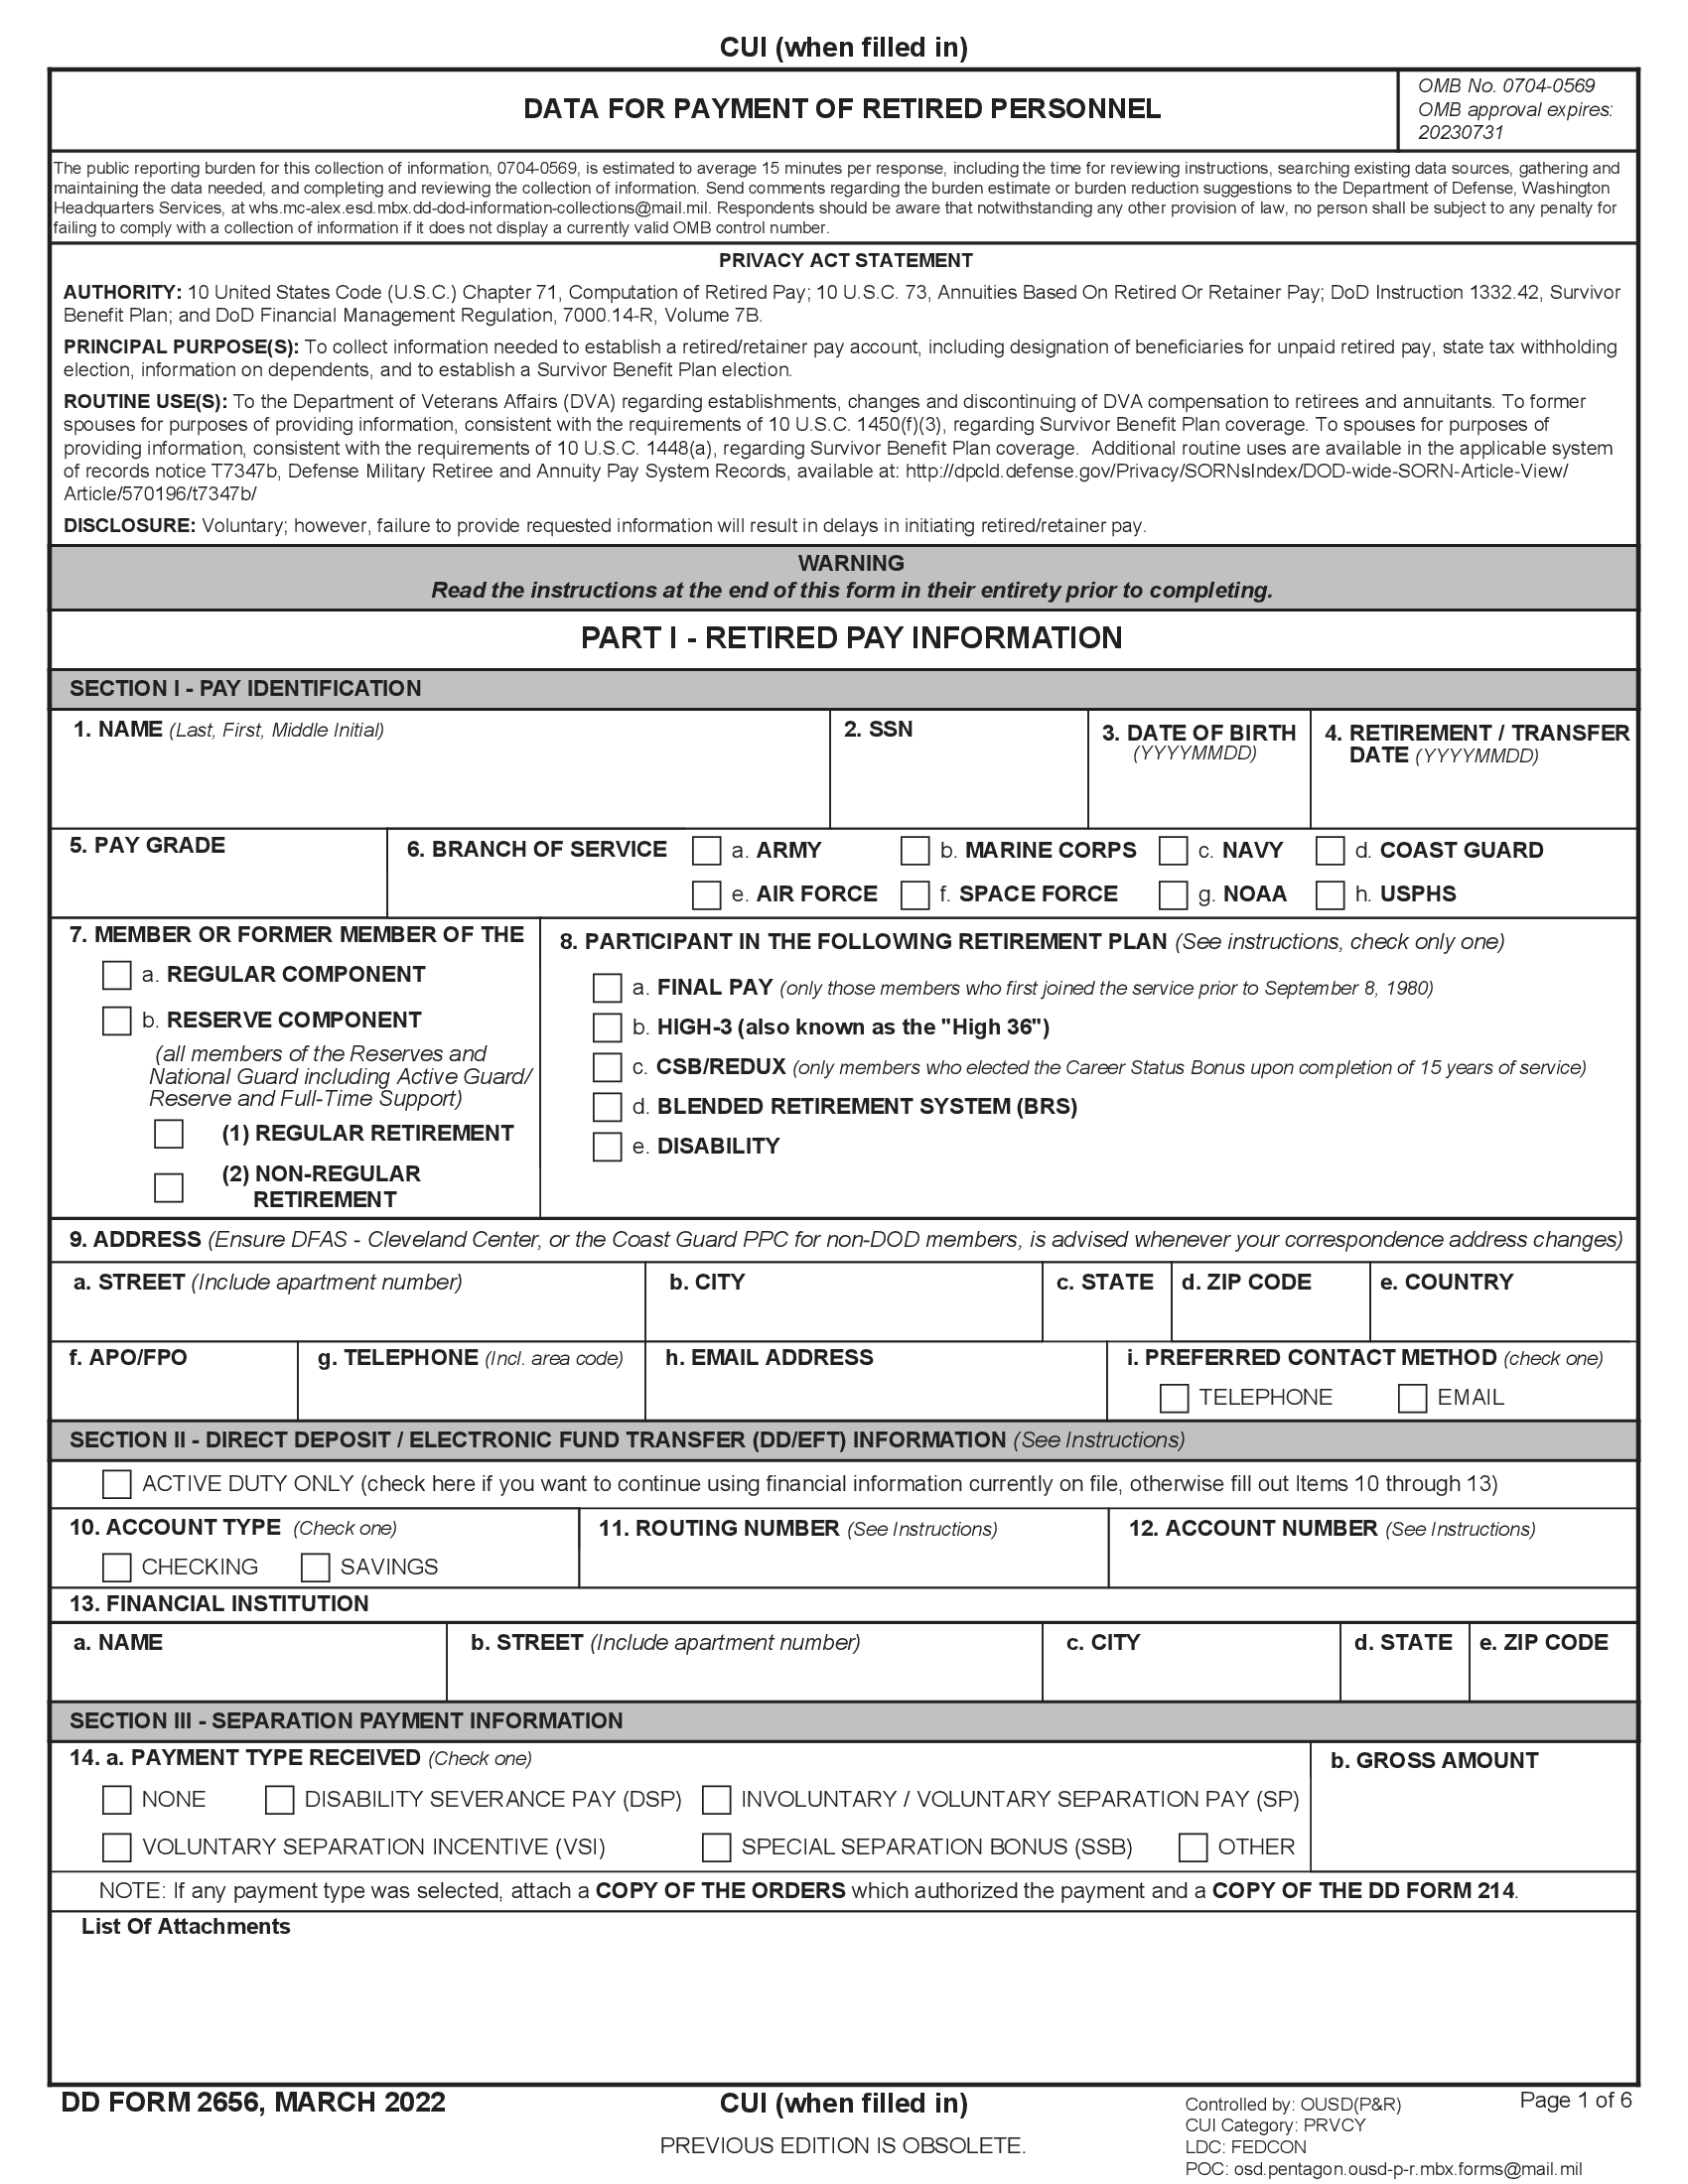 DD Form 2656. Data for Payment of Retired Personnel | Forms - Docs - 2023